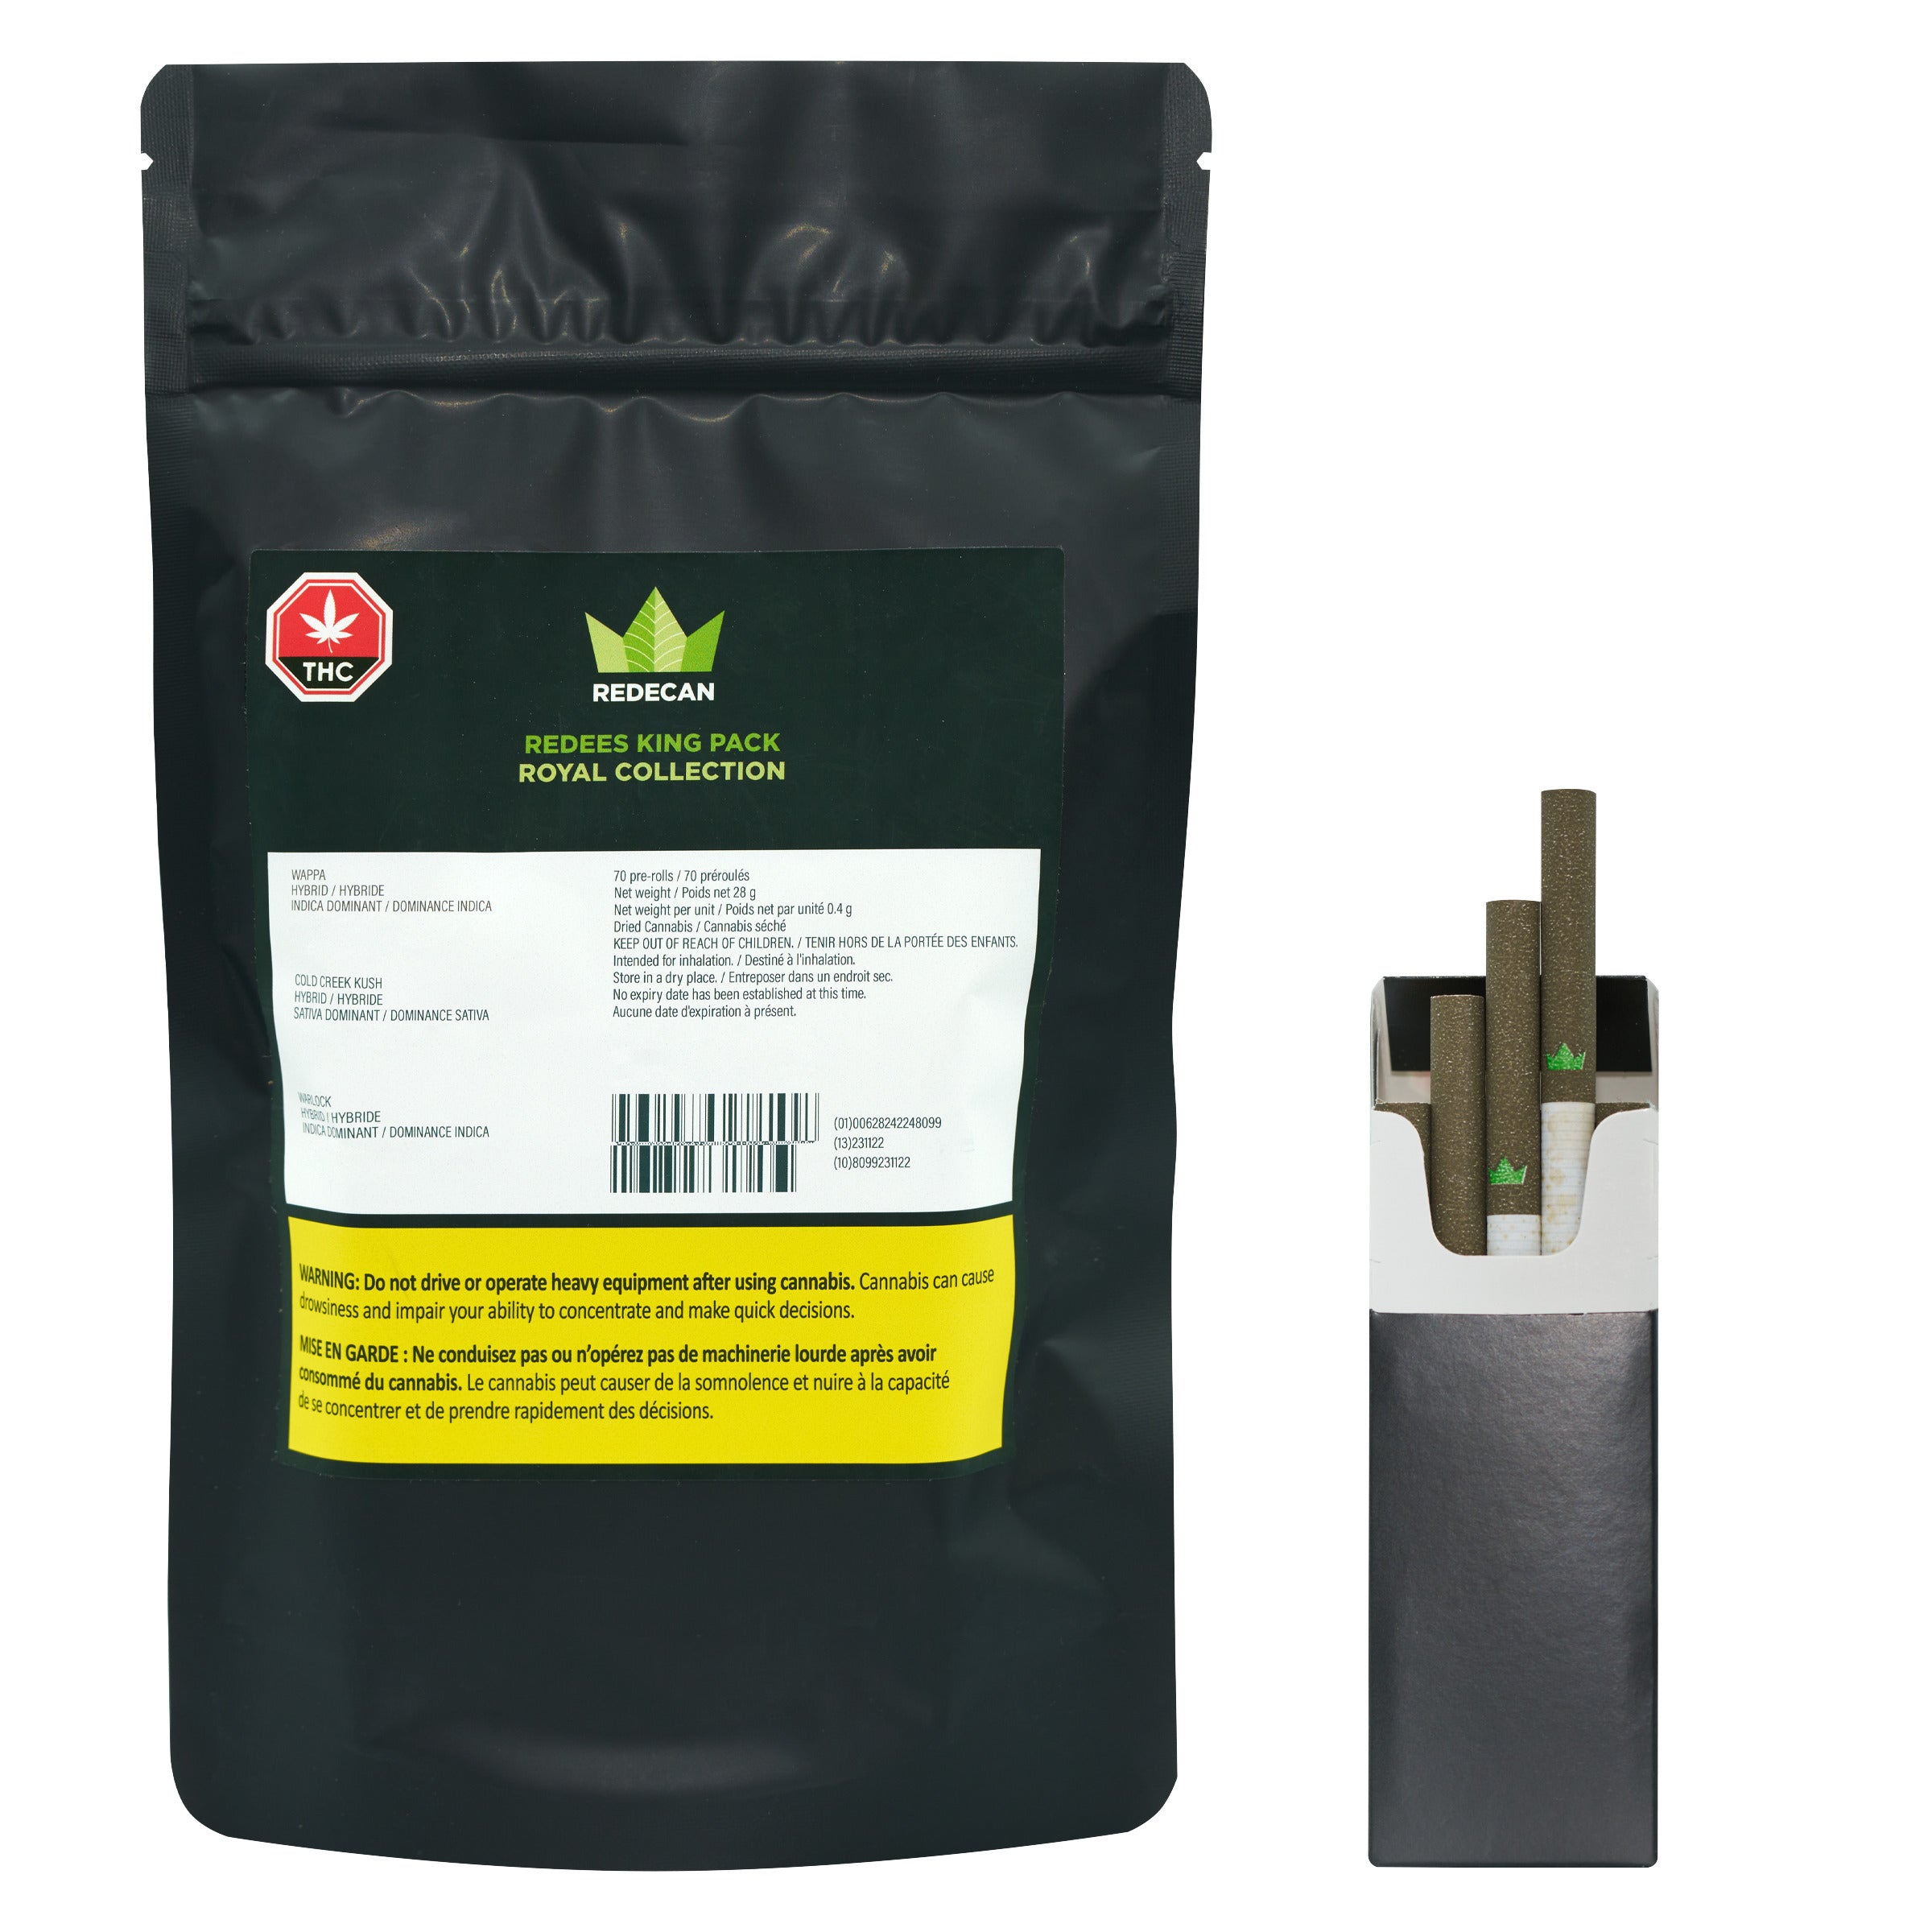 REDECAN ROYAL COLLECTION REDEES (H) PRE-ROLL - 0.4G X 70